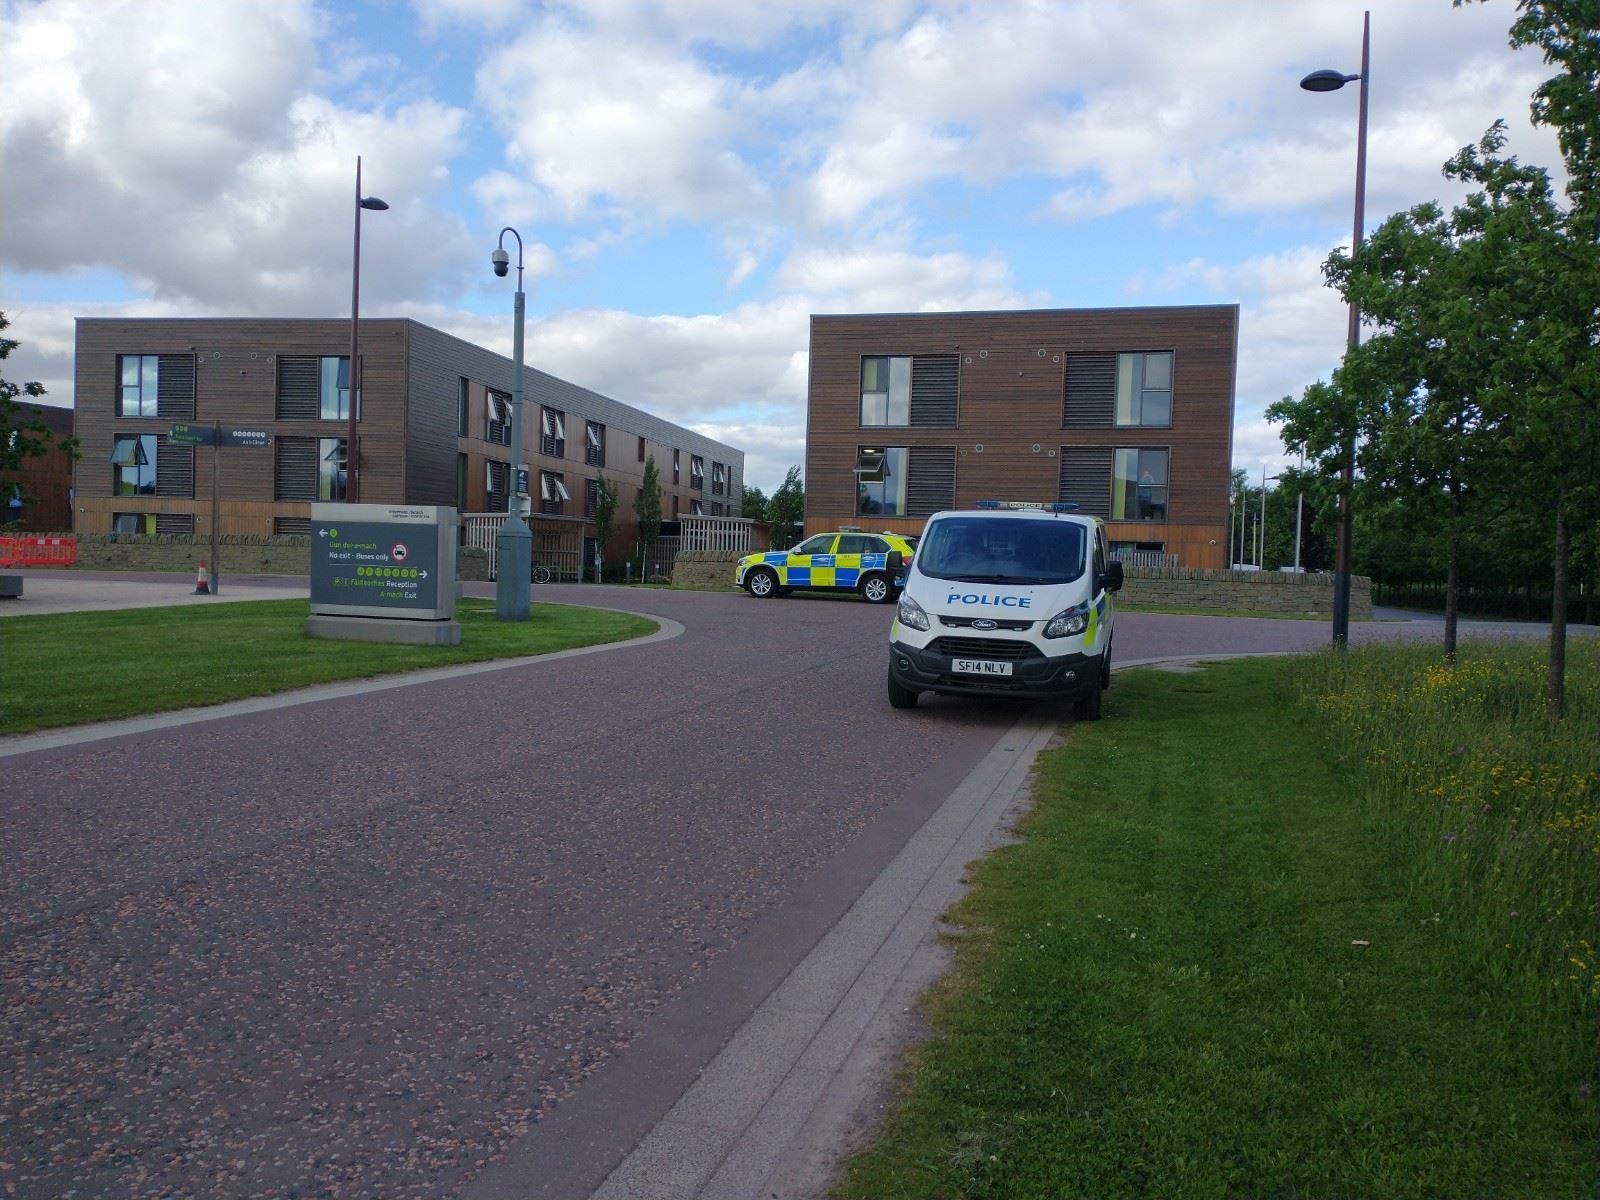 Police were at the student accommodation on Friday afternoon.